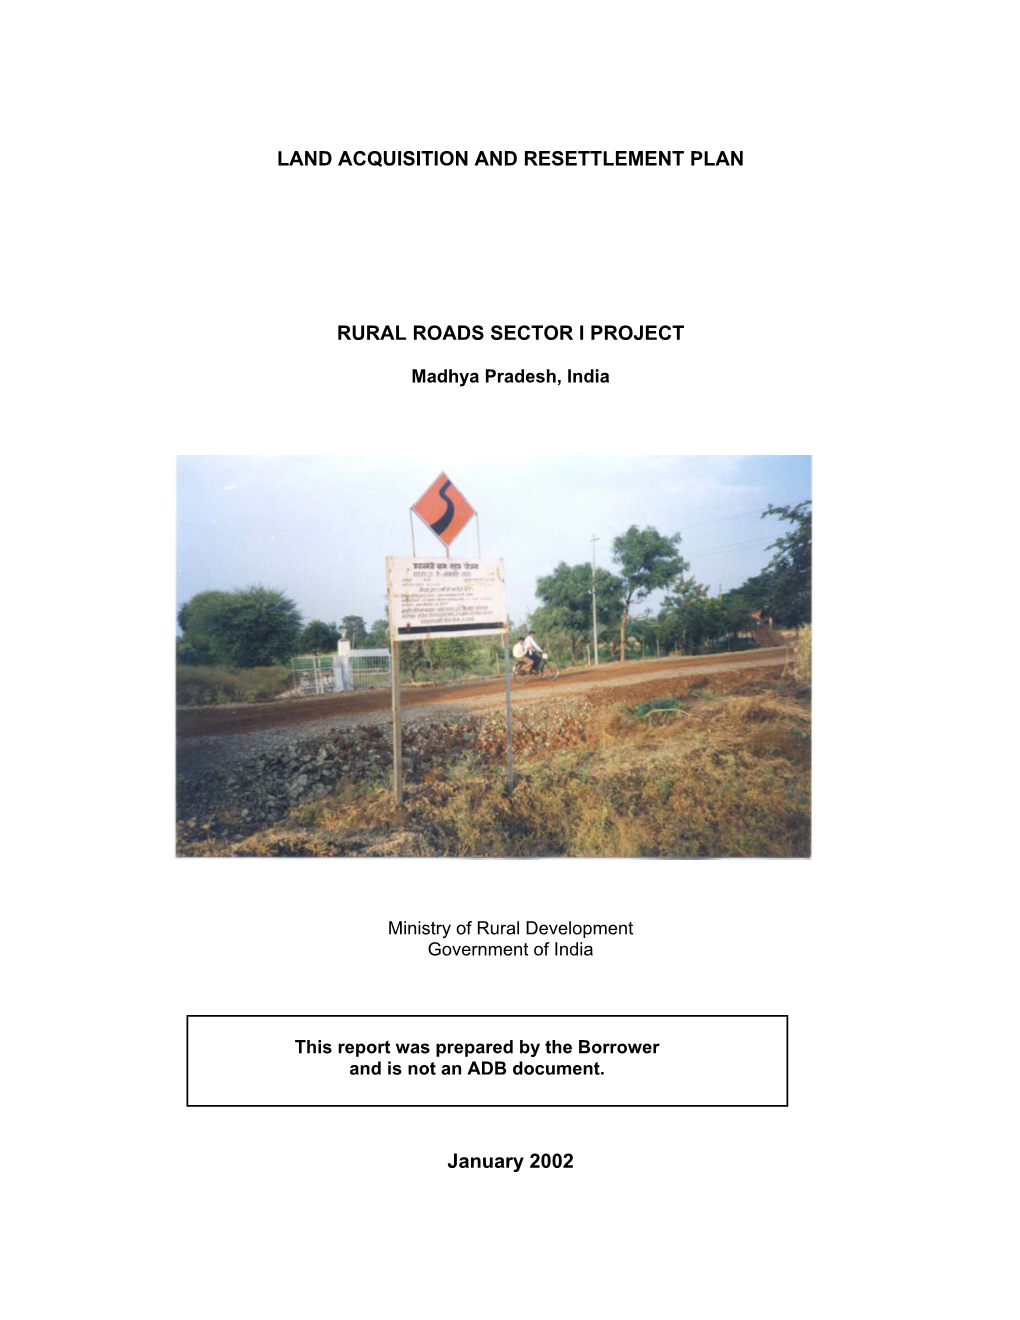 Land Acquisition and Resettlement Plan Rural